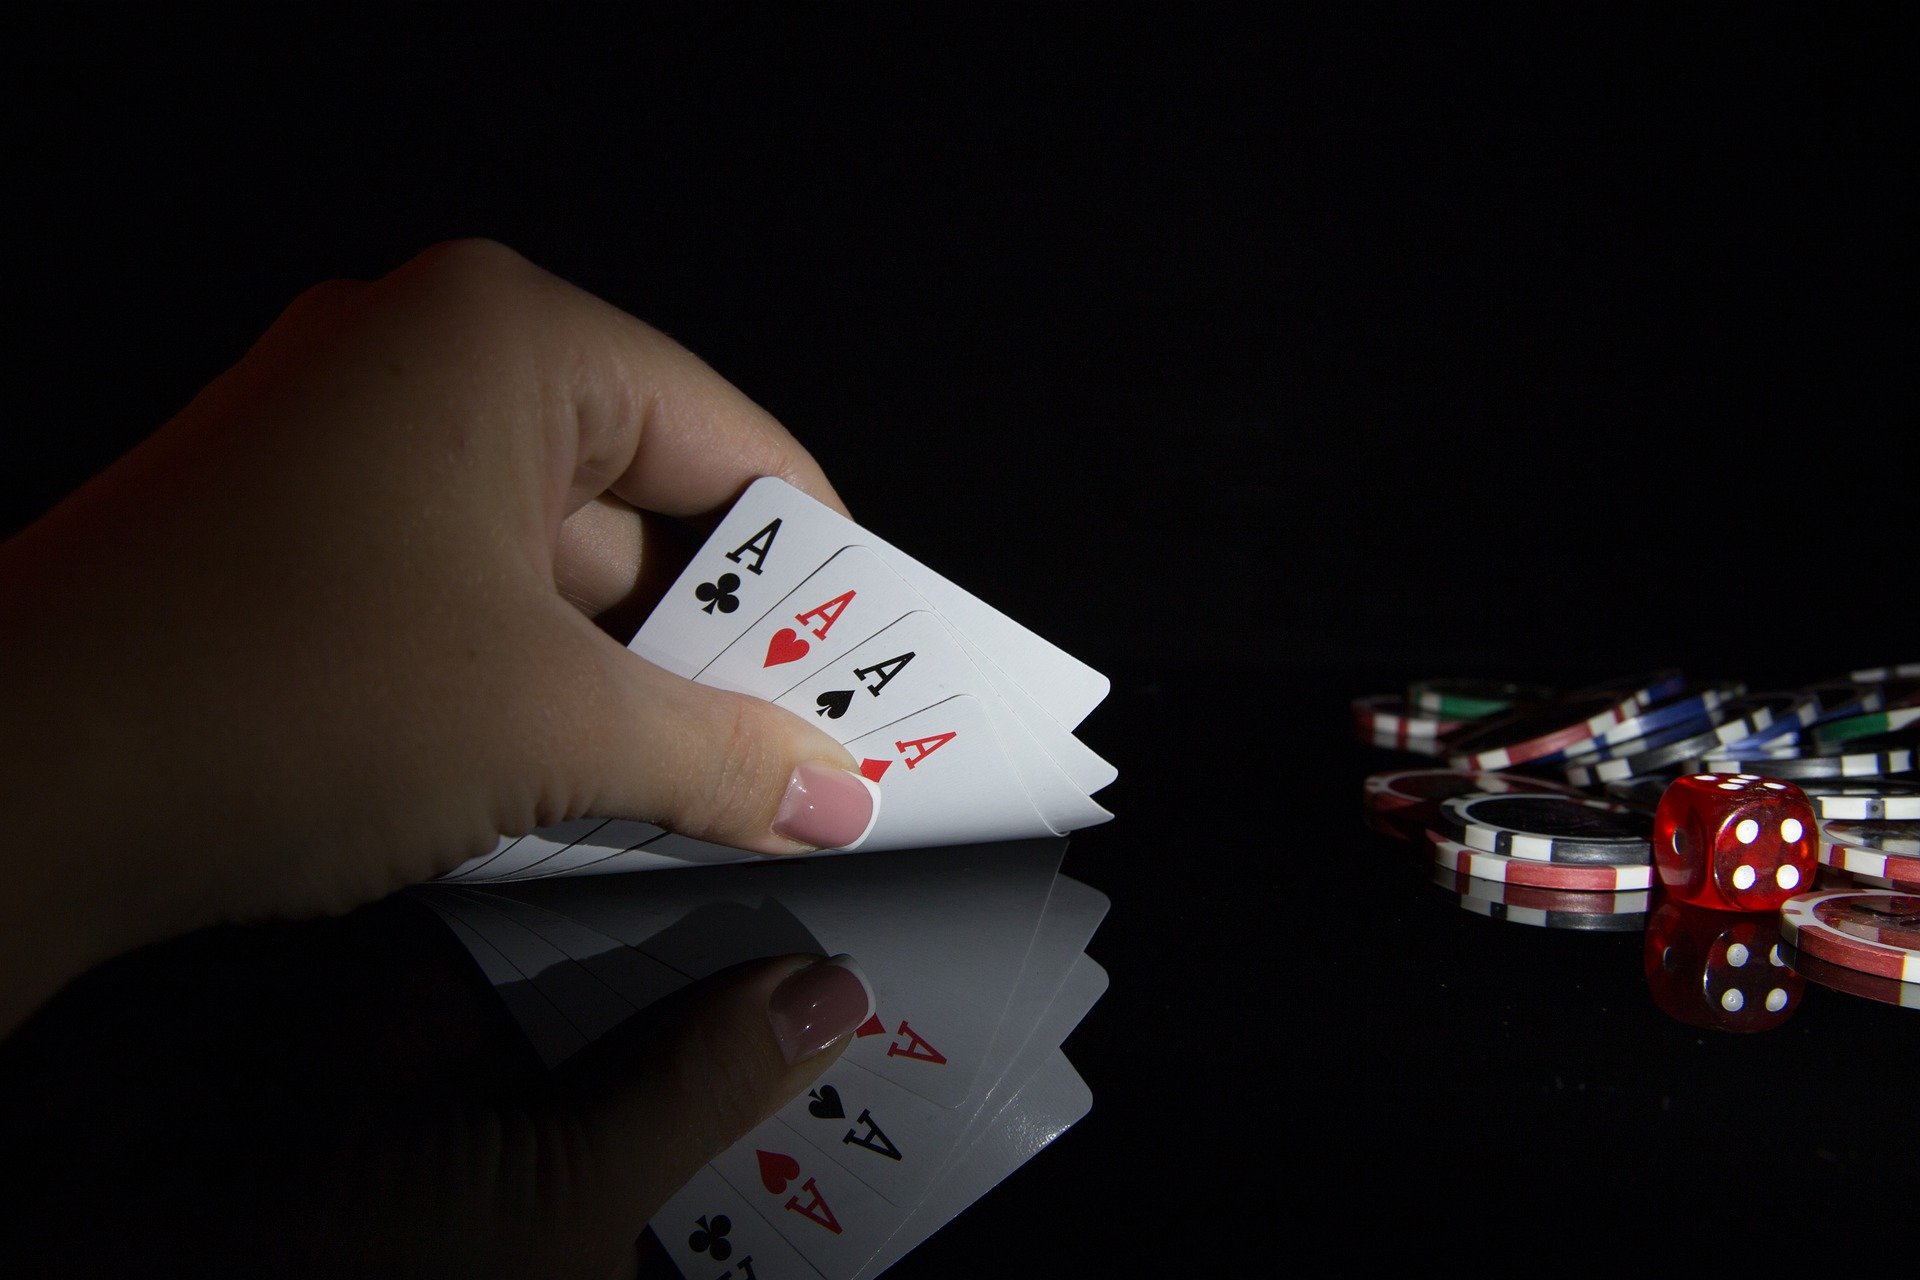 in article about bulgarian company Sesame, a hand of cards and some poker chips